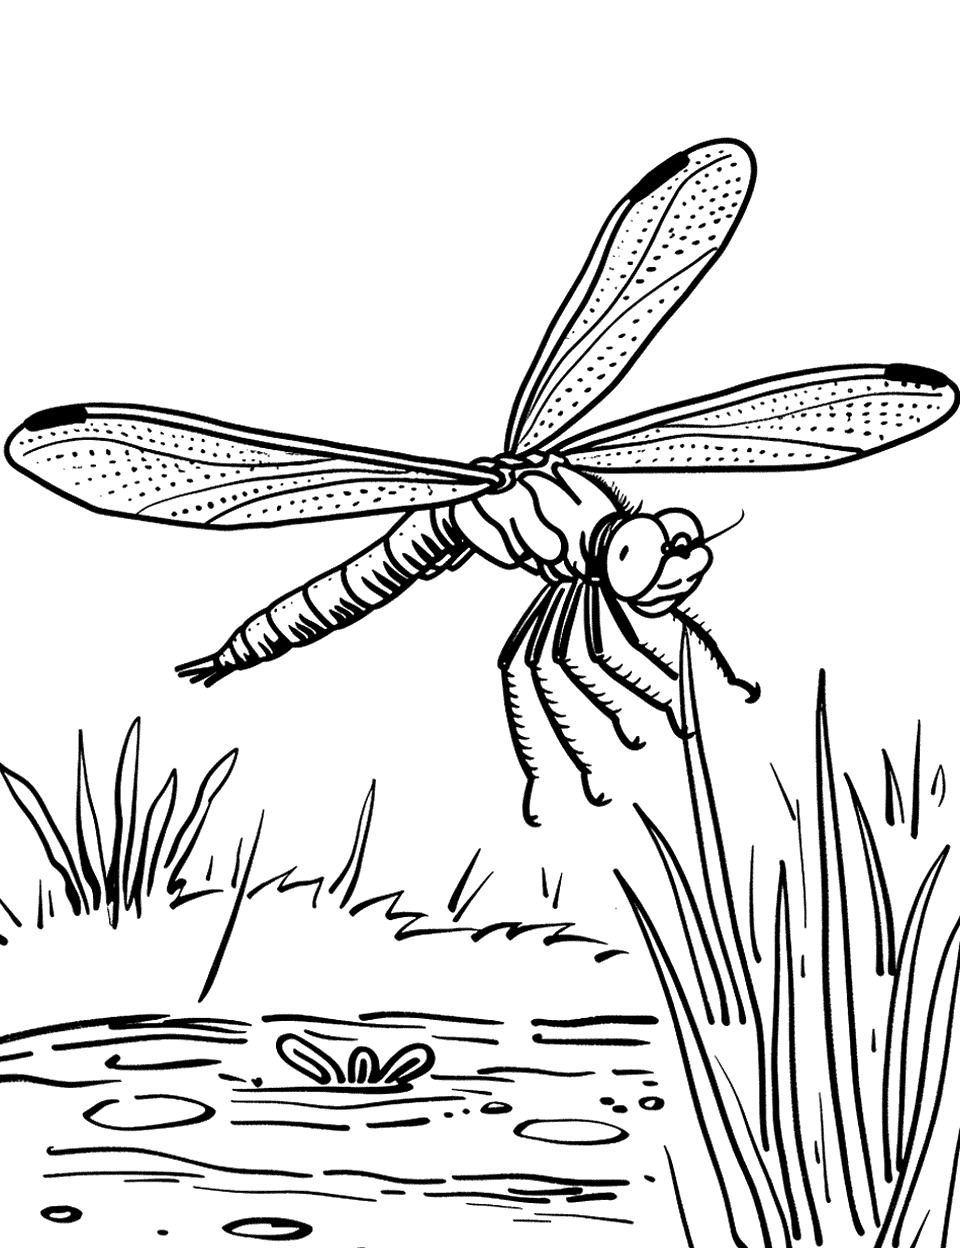 Dragonfly Hovering Over a Pond Insect Coloring Page - A dragonfly gracefully hovering above a still pond.